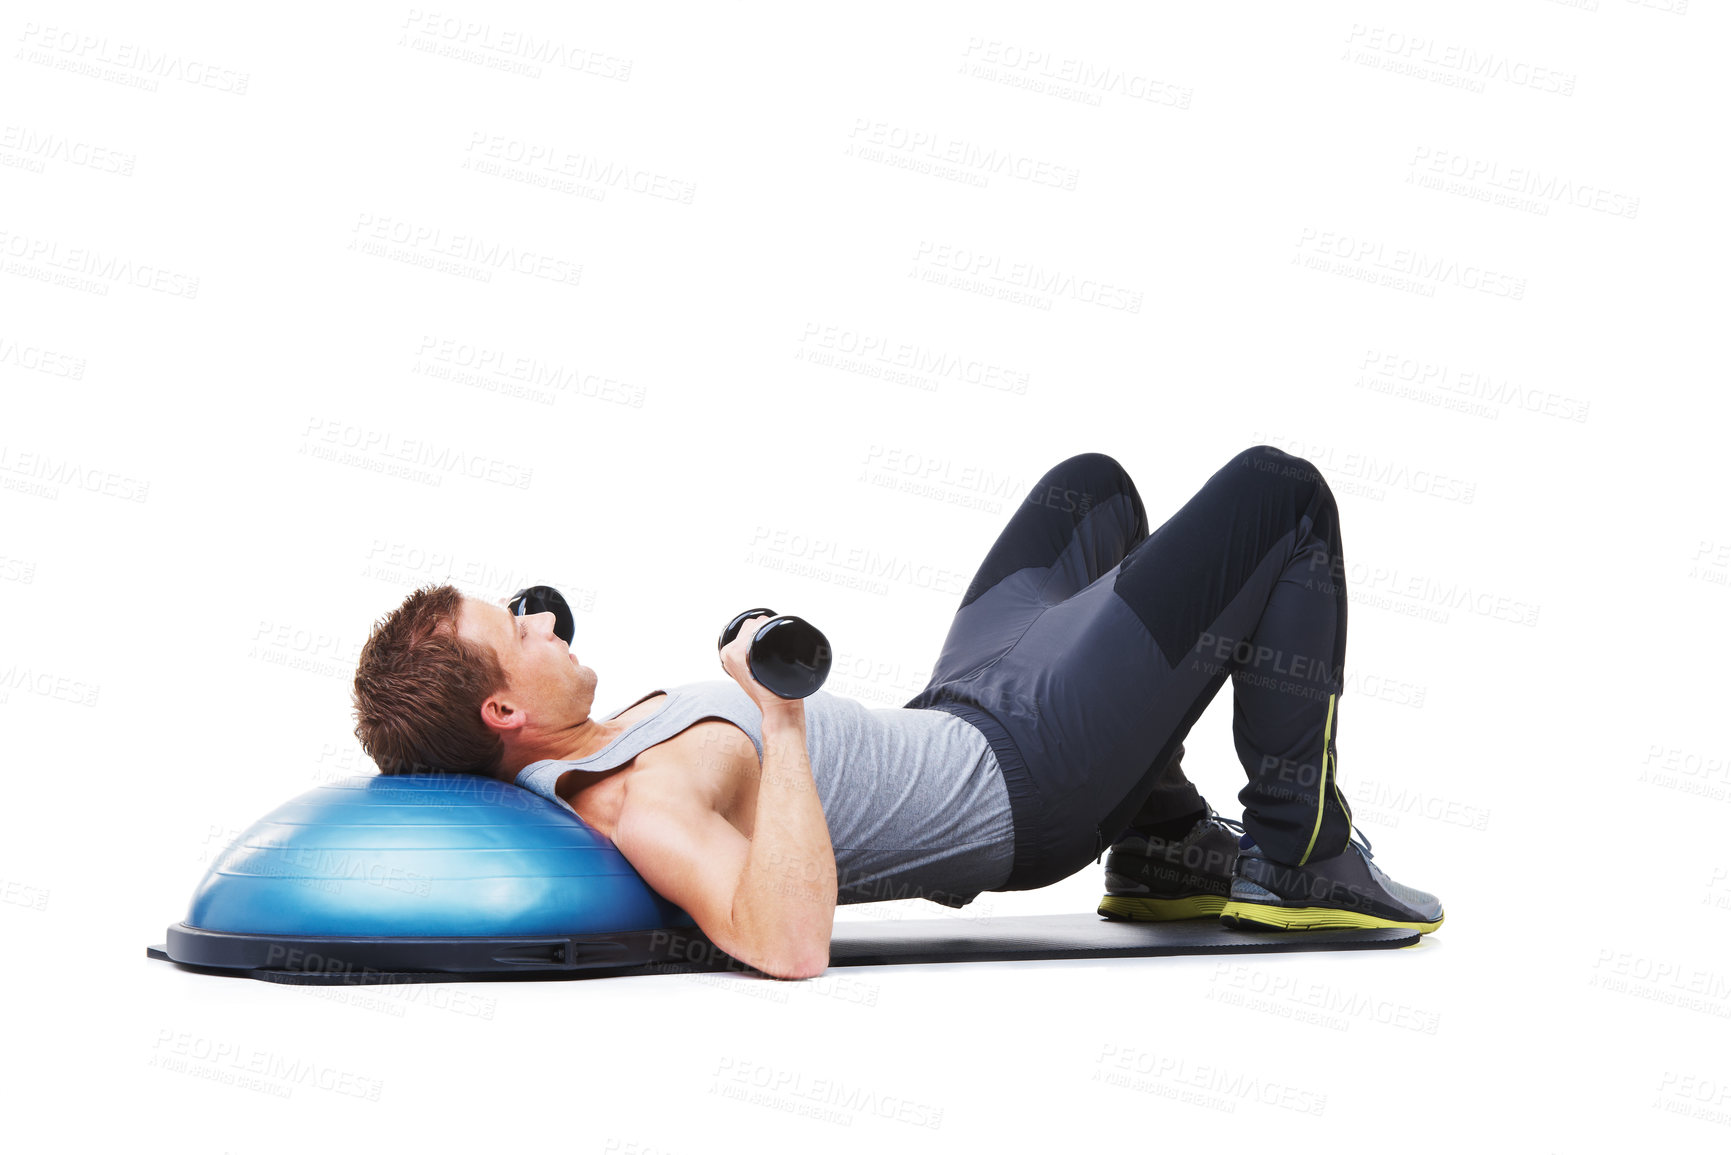 Buy stock photo Studio shot of young people working out